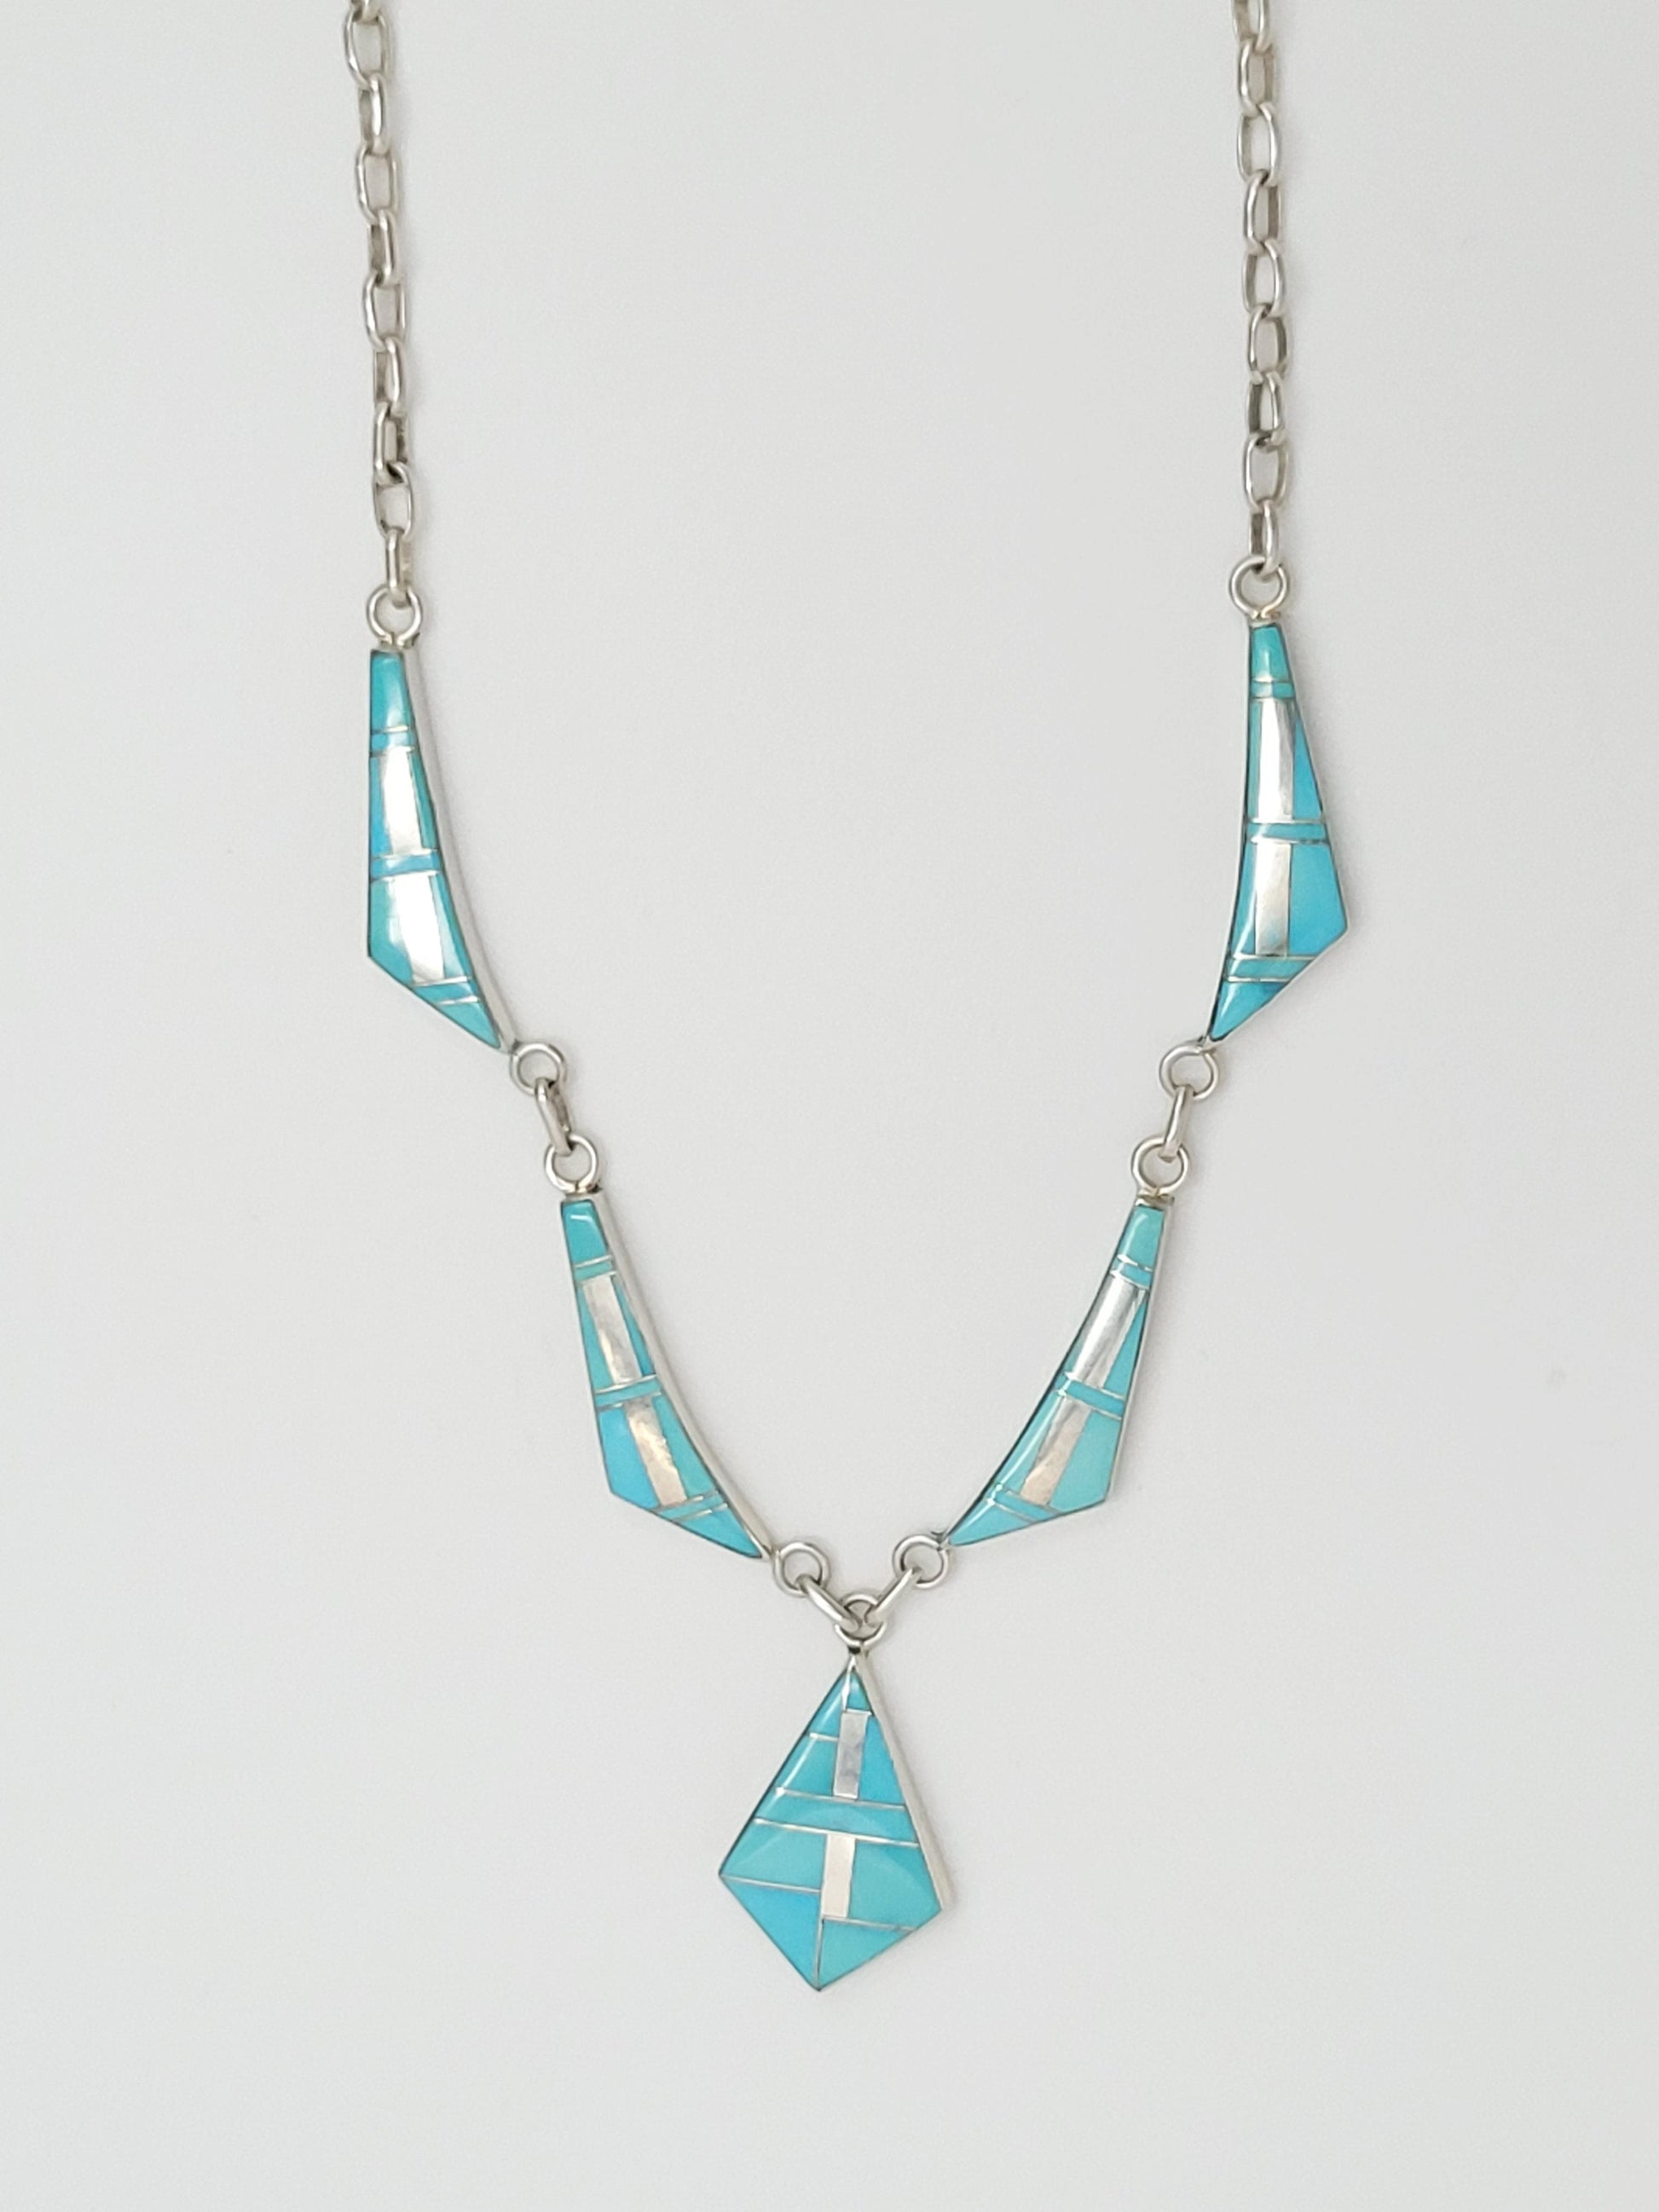 DM Begay Jewelry Navajo Artist DM Begay Sterling Silver Turquoise Modernist Necklace Circa 1990s